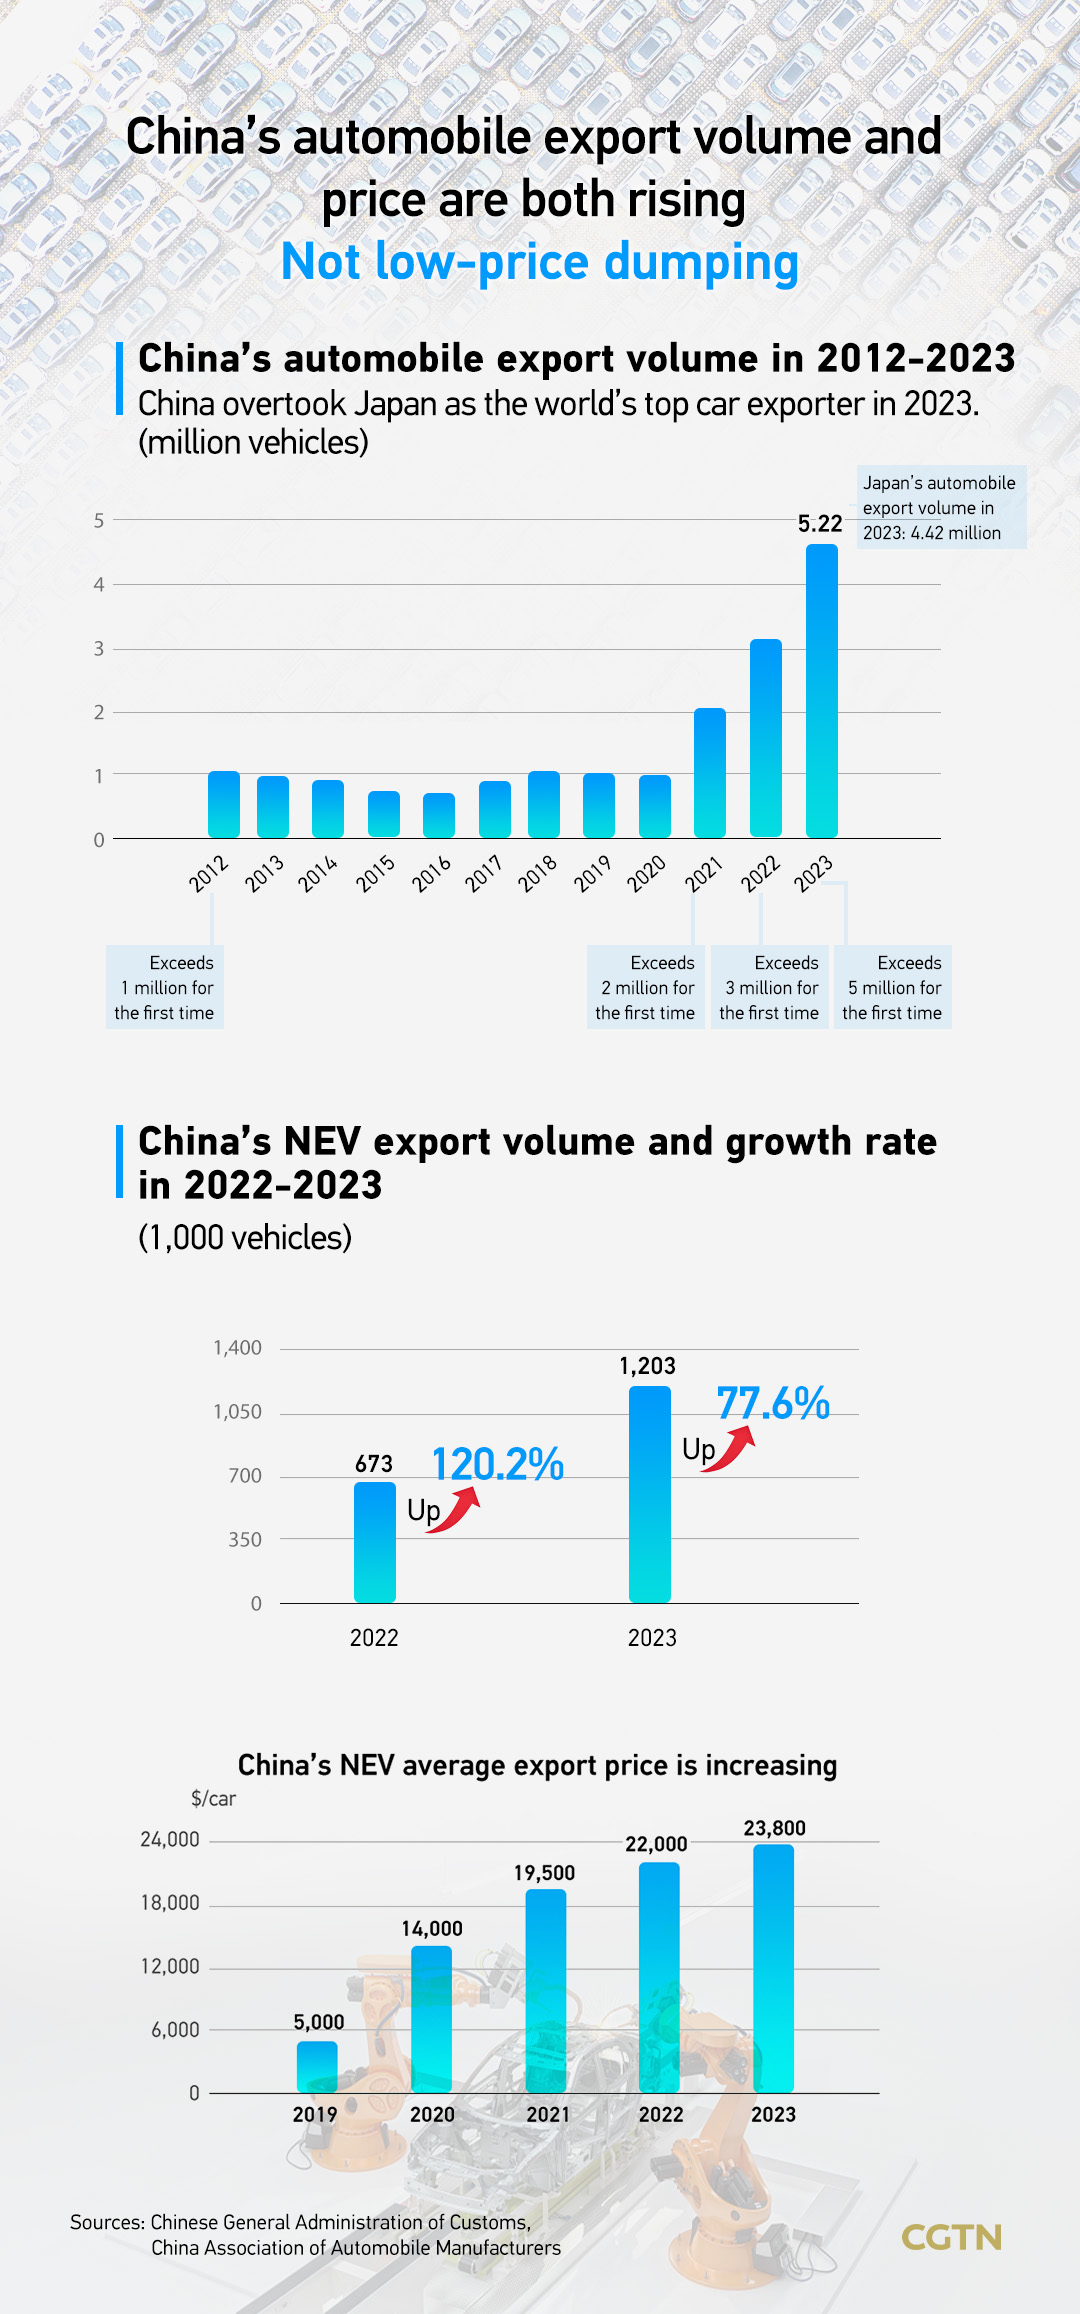 Graphics: China's automobile export volume and price are both rising